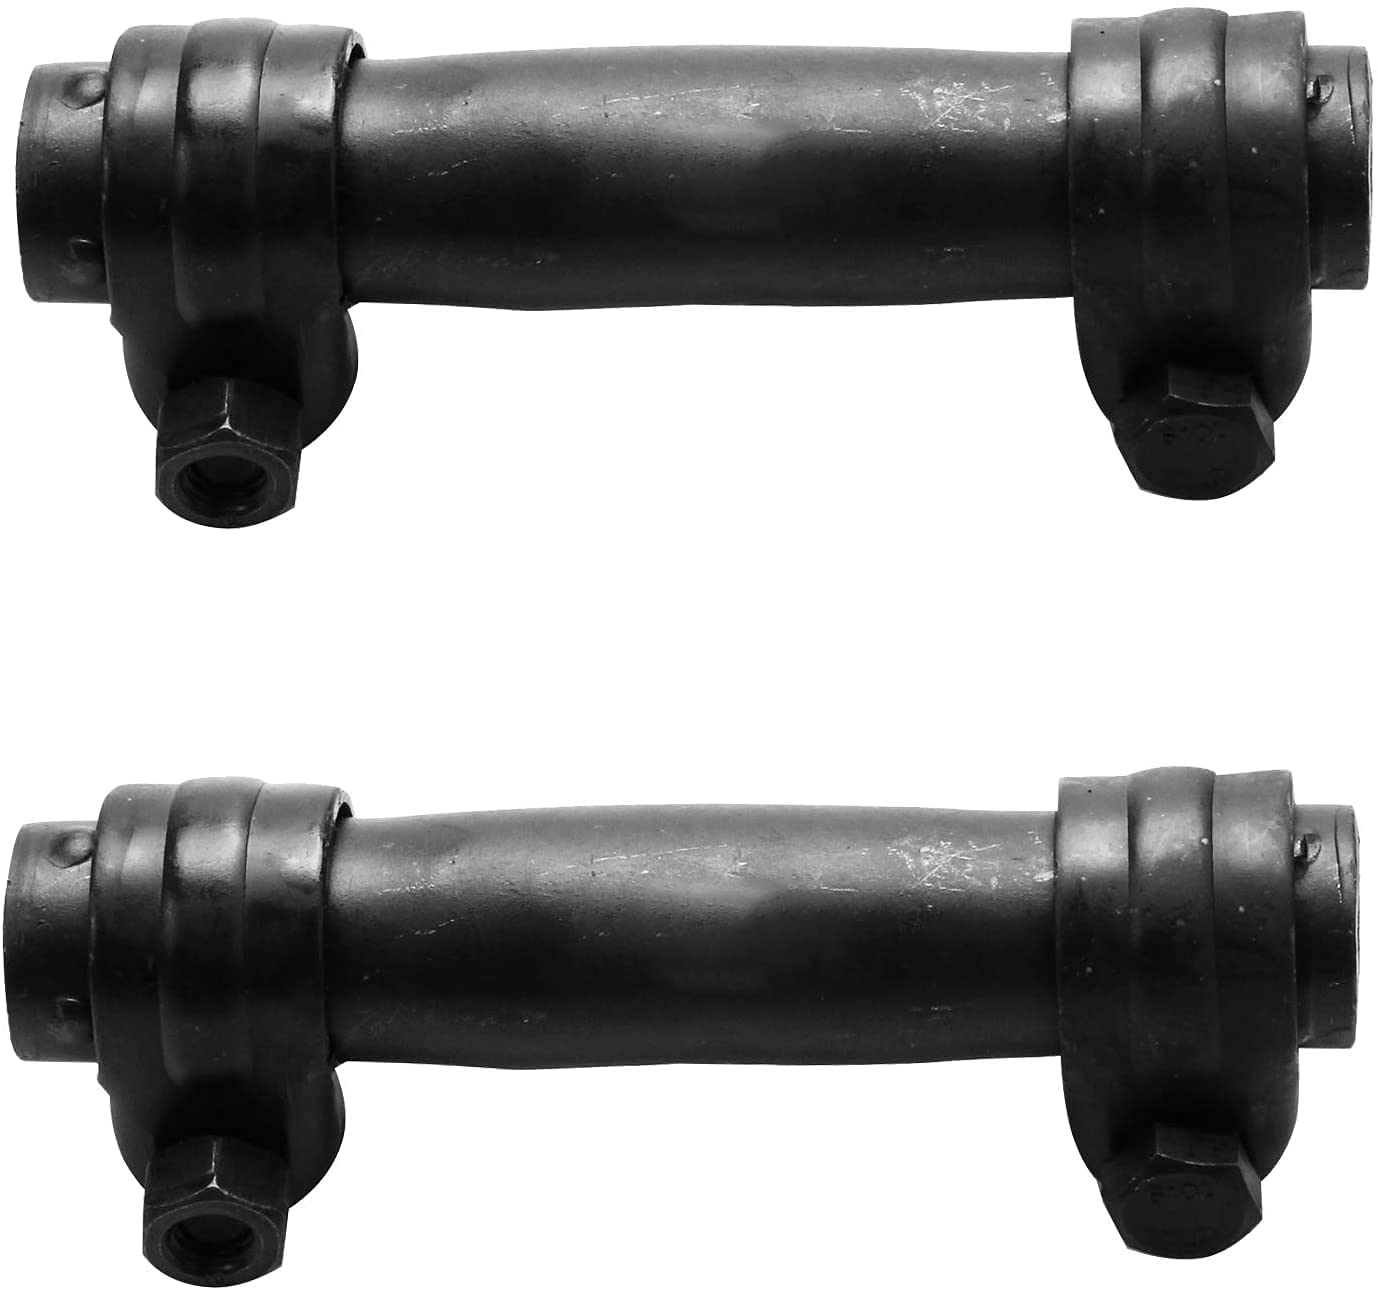 Detroit Axle Front Upper Control Arms Lower Ball Joints Tie Rod Ends  Replacement for Chevy Blazer S10 GMC Jimmy Sonoma Olds Bravada 4x4 Only  10pc Set